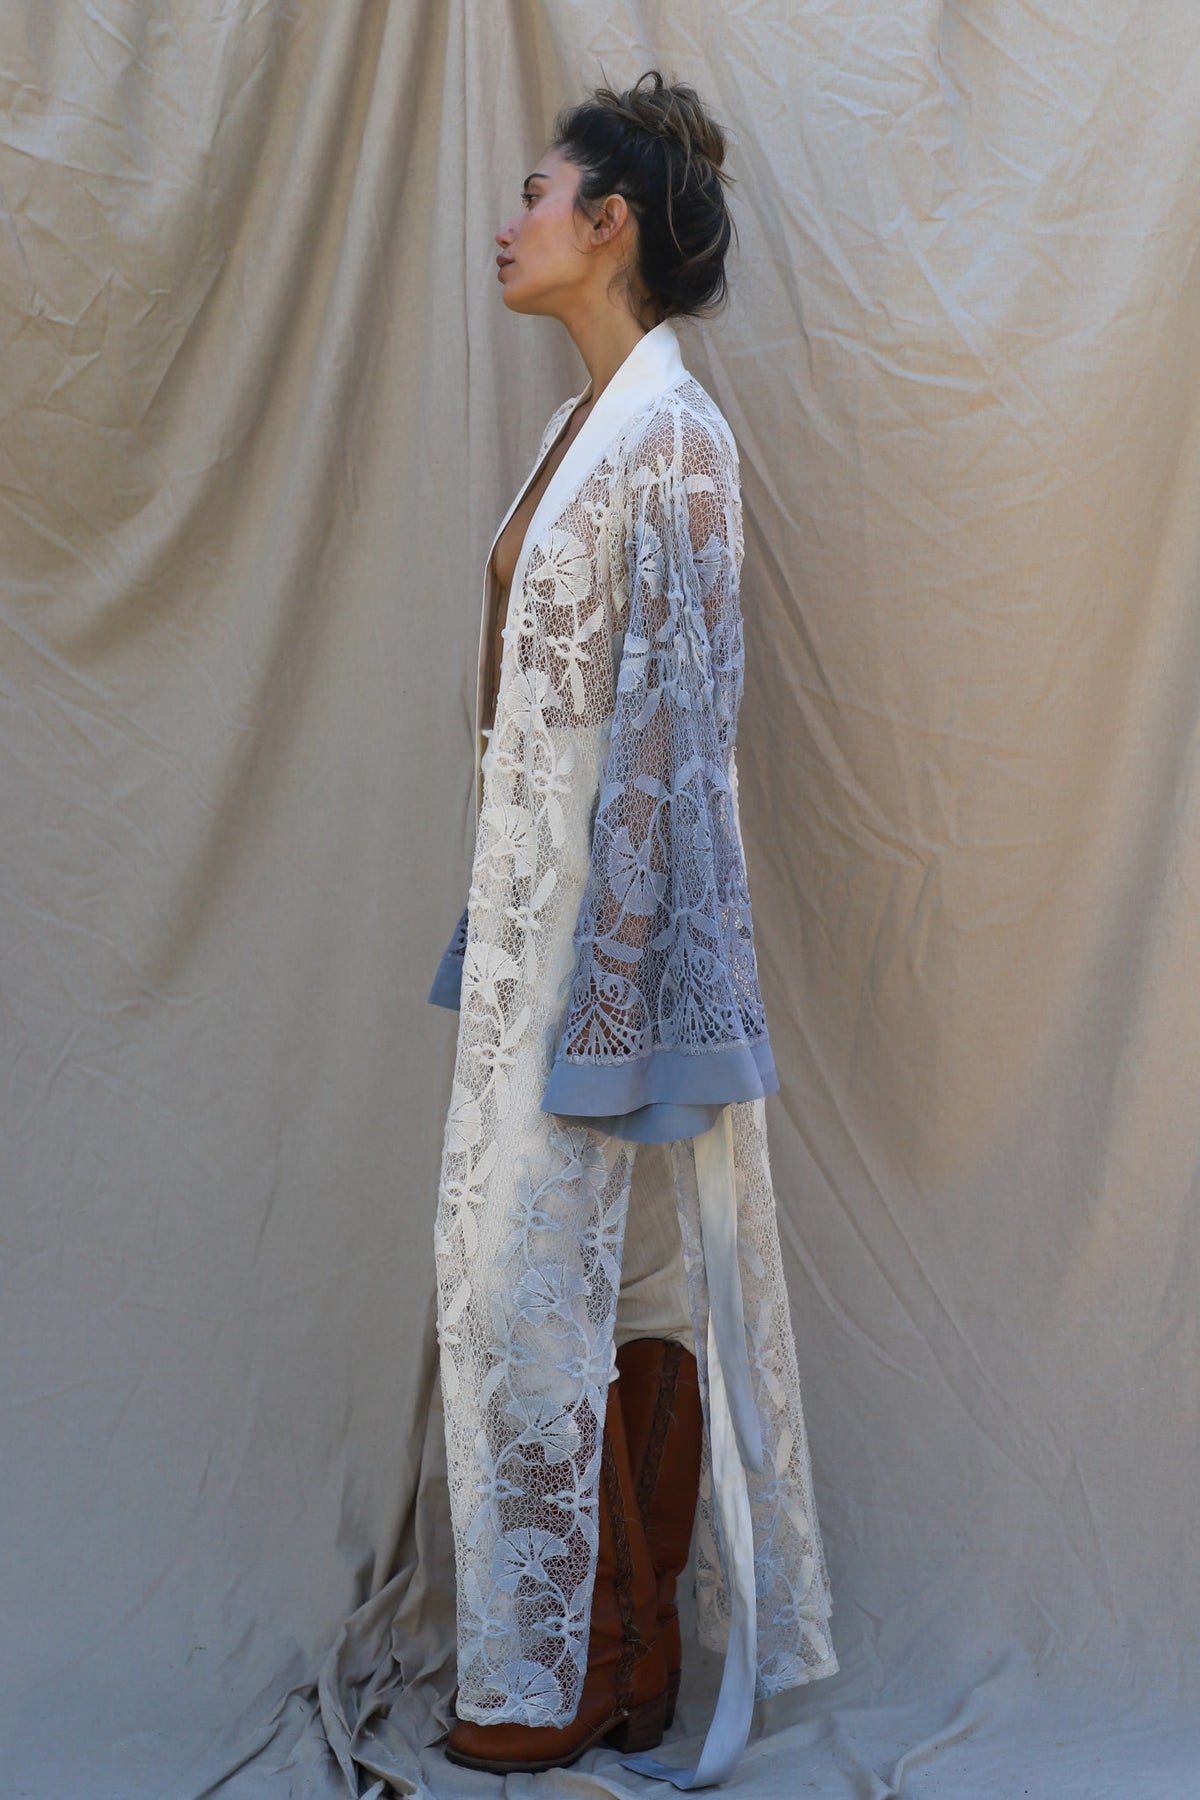 ombre lace kimono is natural in center with grey blue dye detail on left and right sides